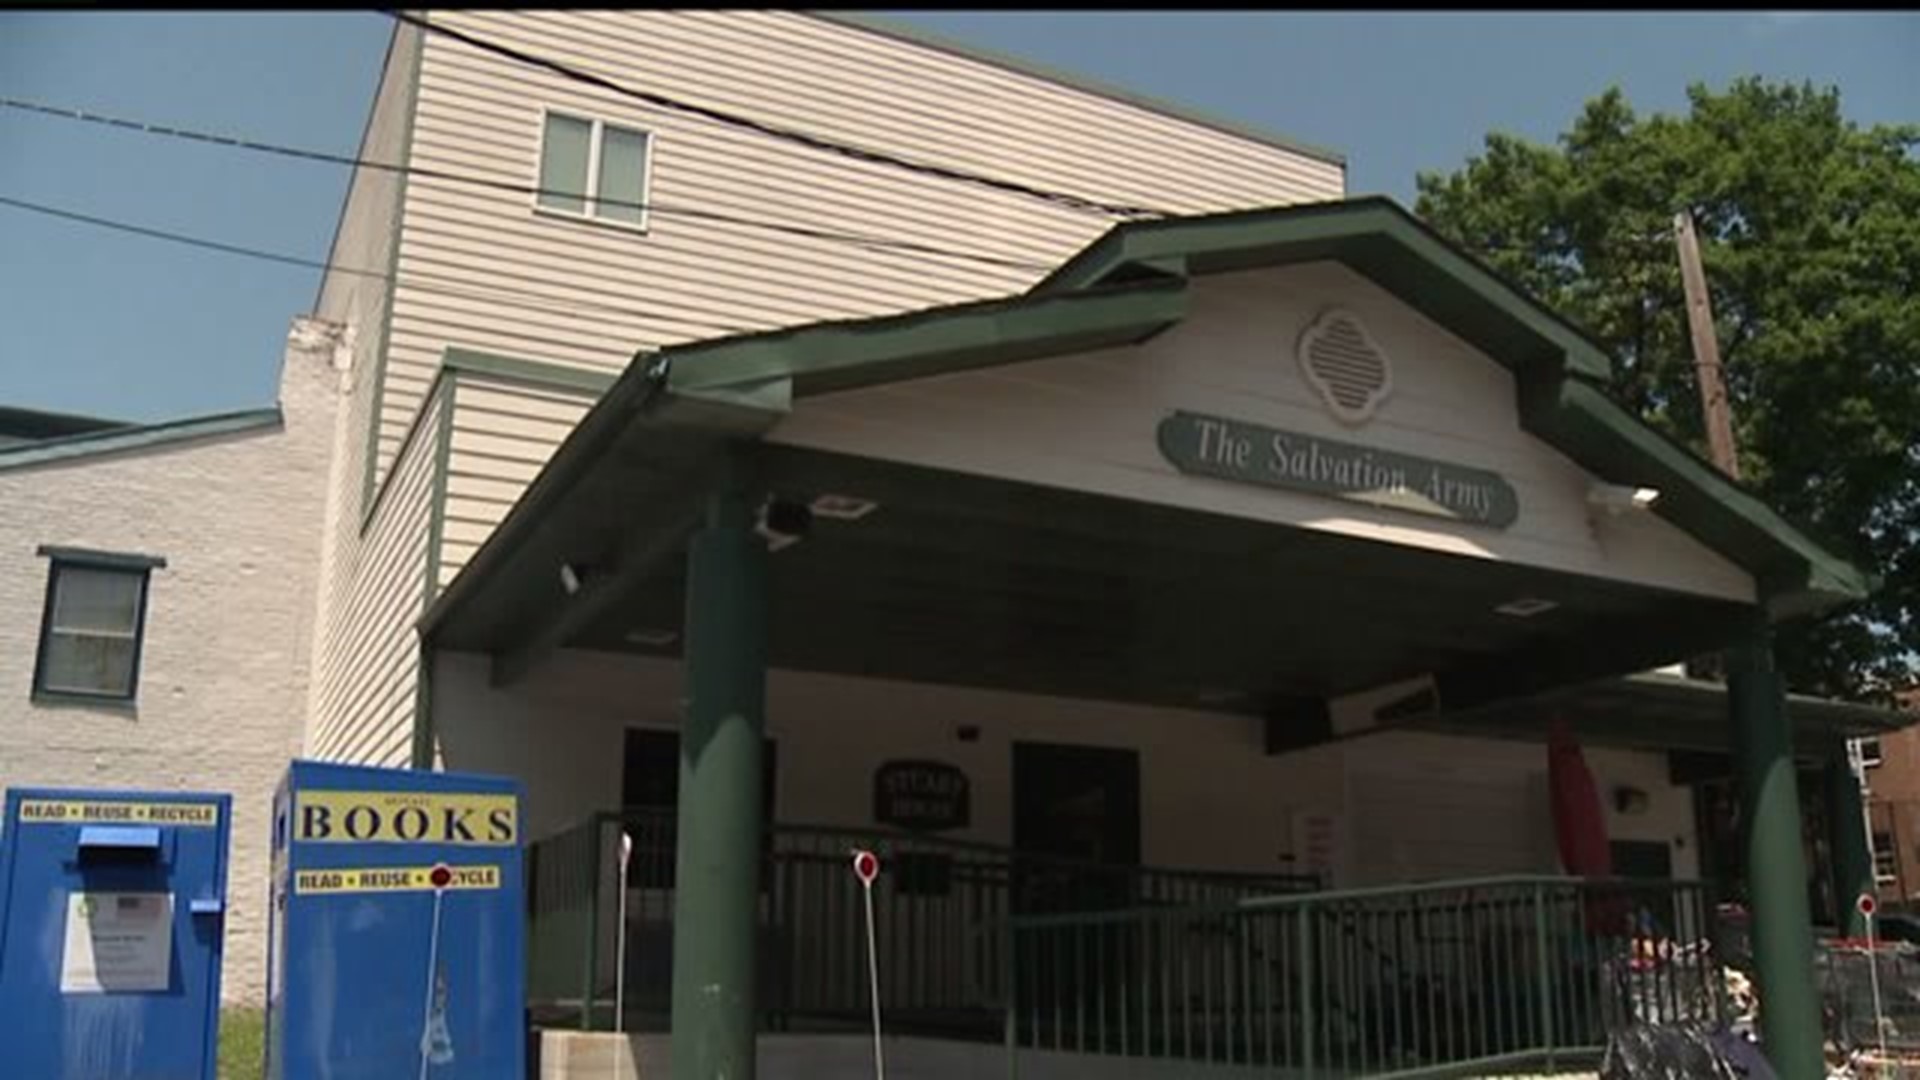 Carlisle Salvation Army transitional housing closing due to funding